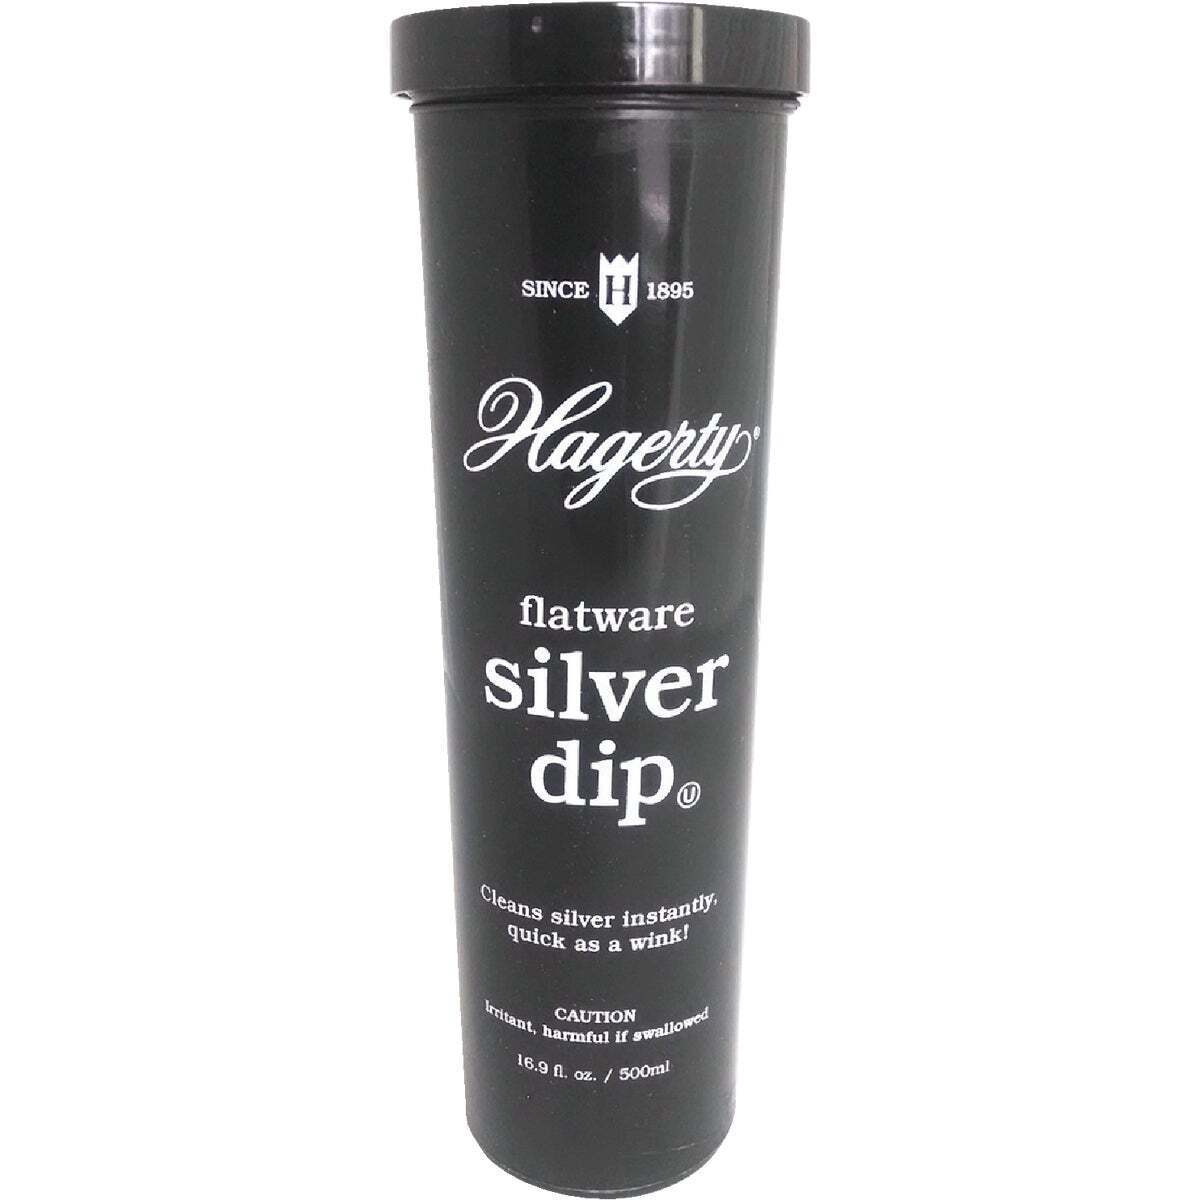 Hagerty 18.9 Oz. Flatware Silver Dip 17245 Pack of 6 Hagerty Silver Dip 17245